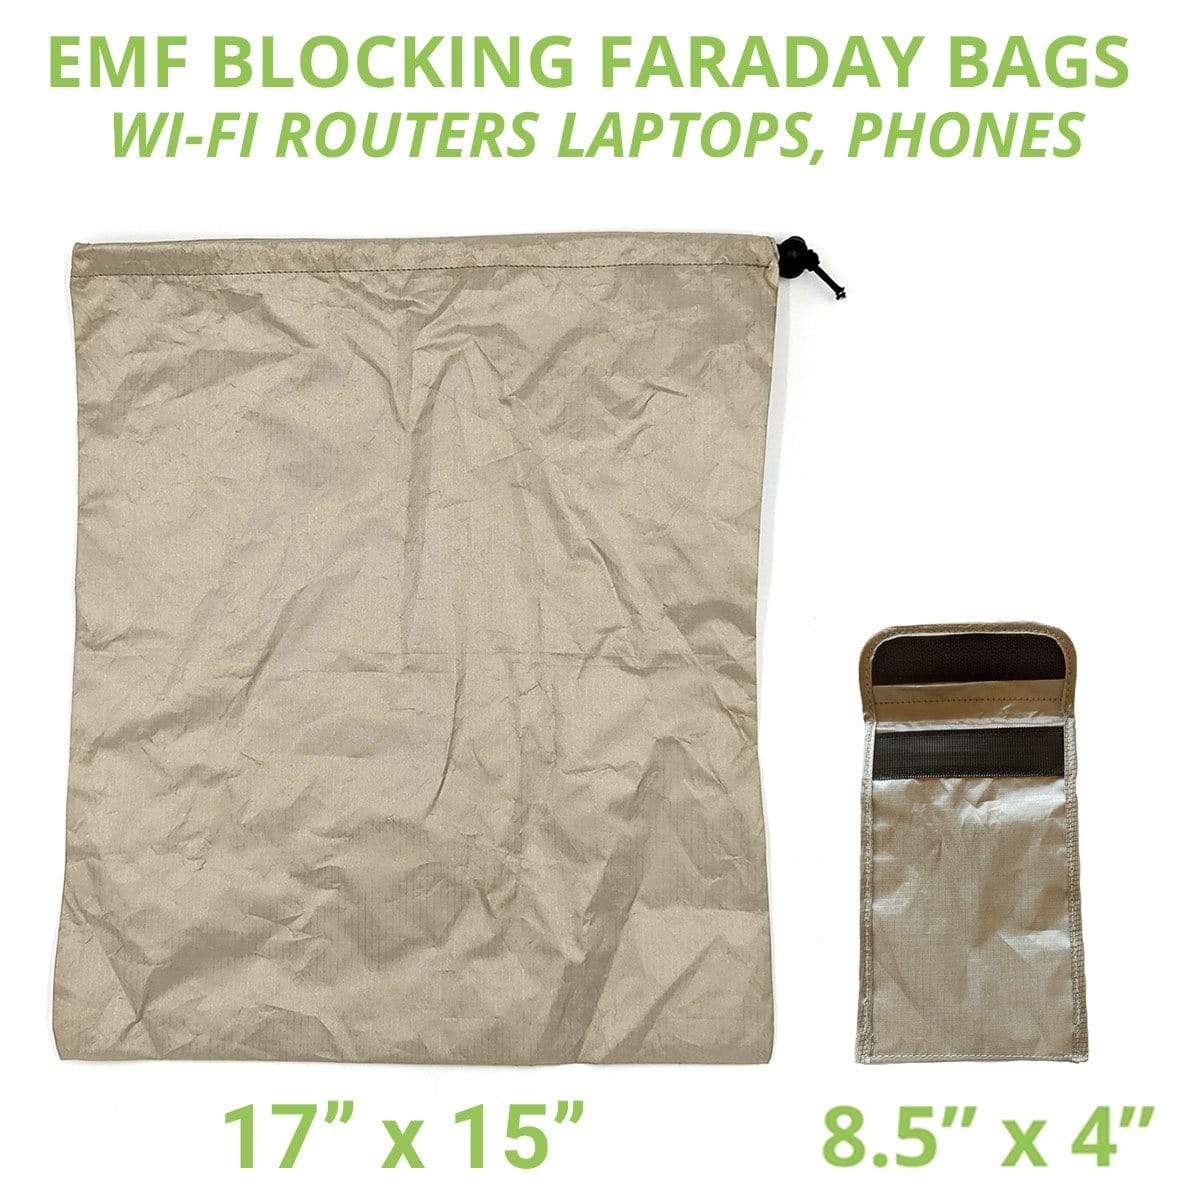 All-Purpose EMF Blocking Faraday Bag | RF Anti-Radiation Protection for Smart Meter, Wi-Fi Router, Cell Phone, Laptop Conners Clinic Equipment - Conners Clinic